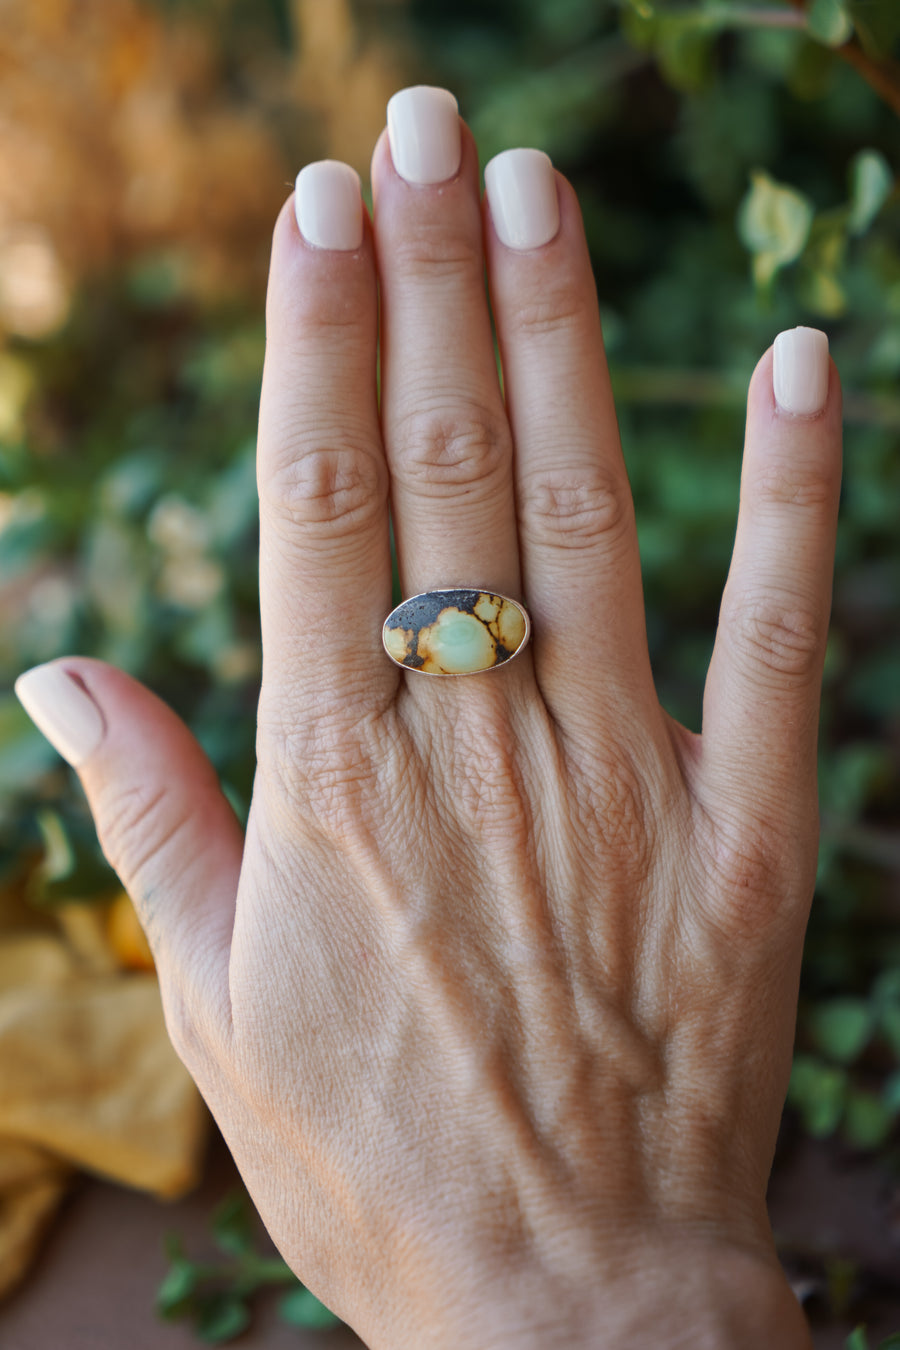 The Horizontal Ring in Giraffe Turquoise (size 8)